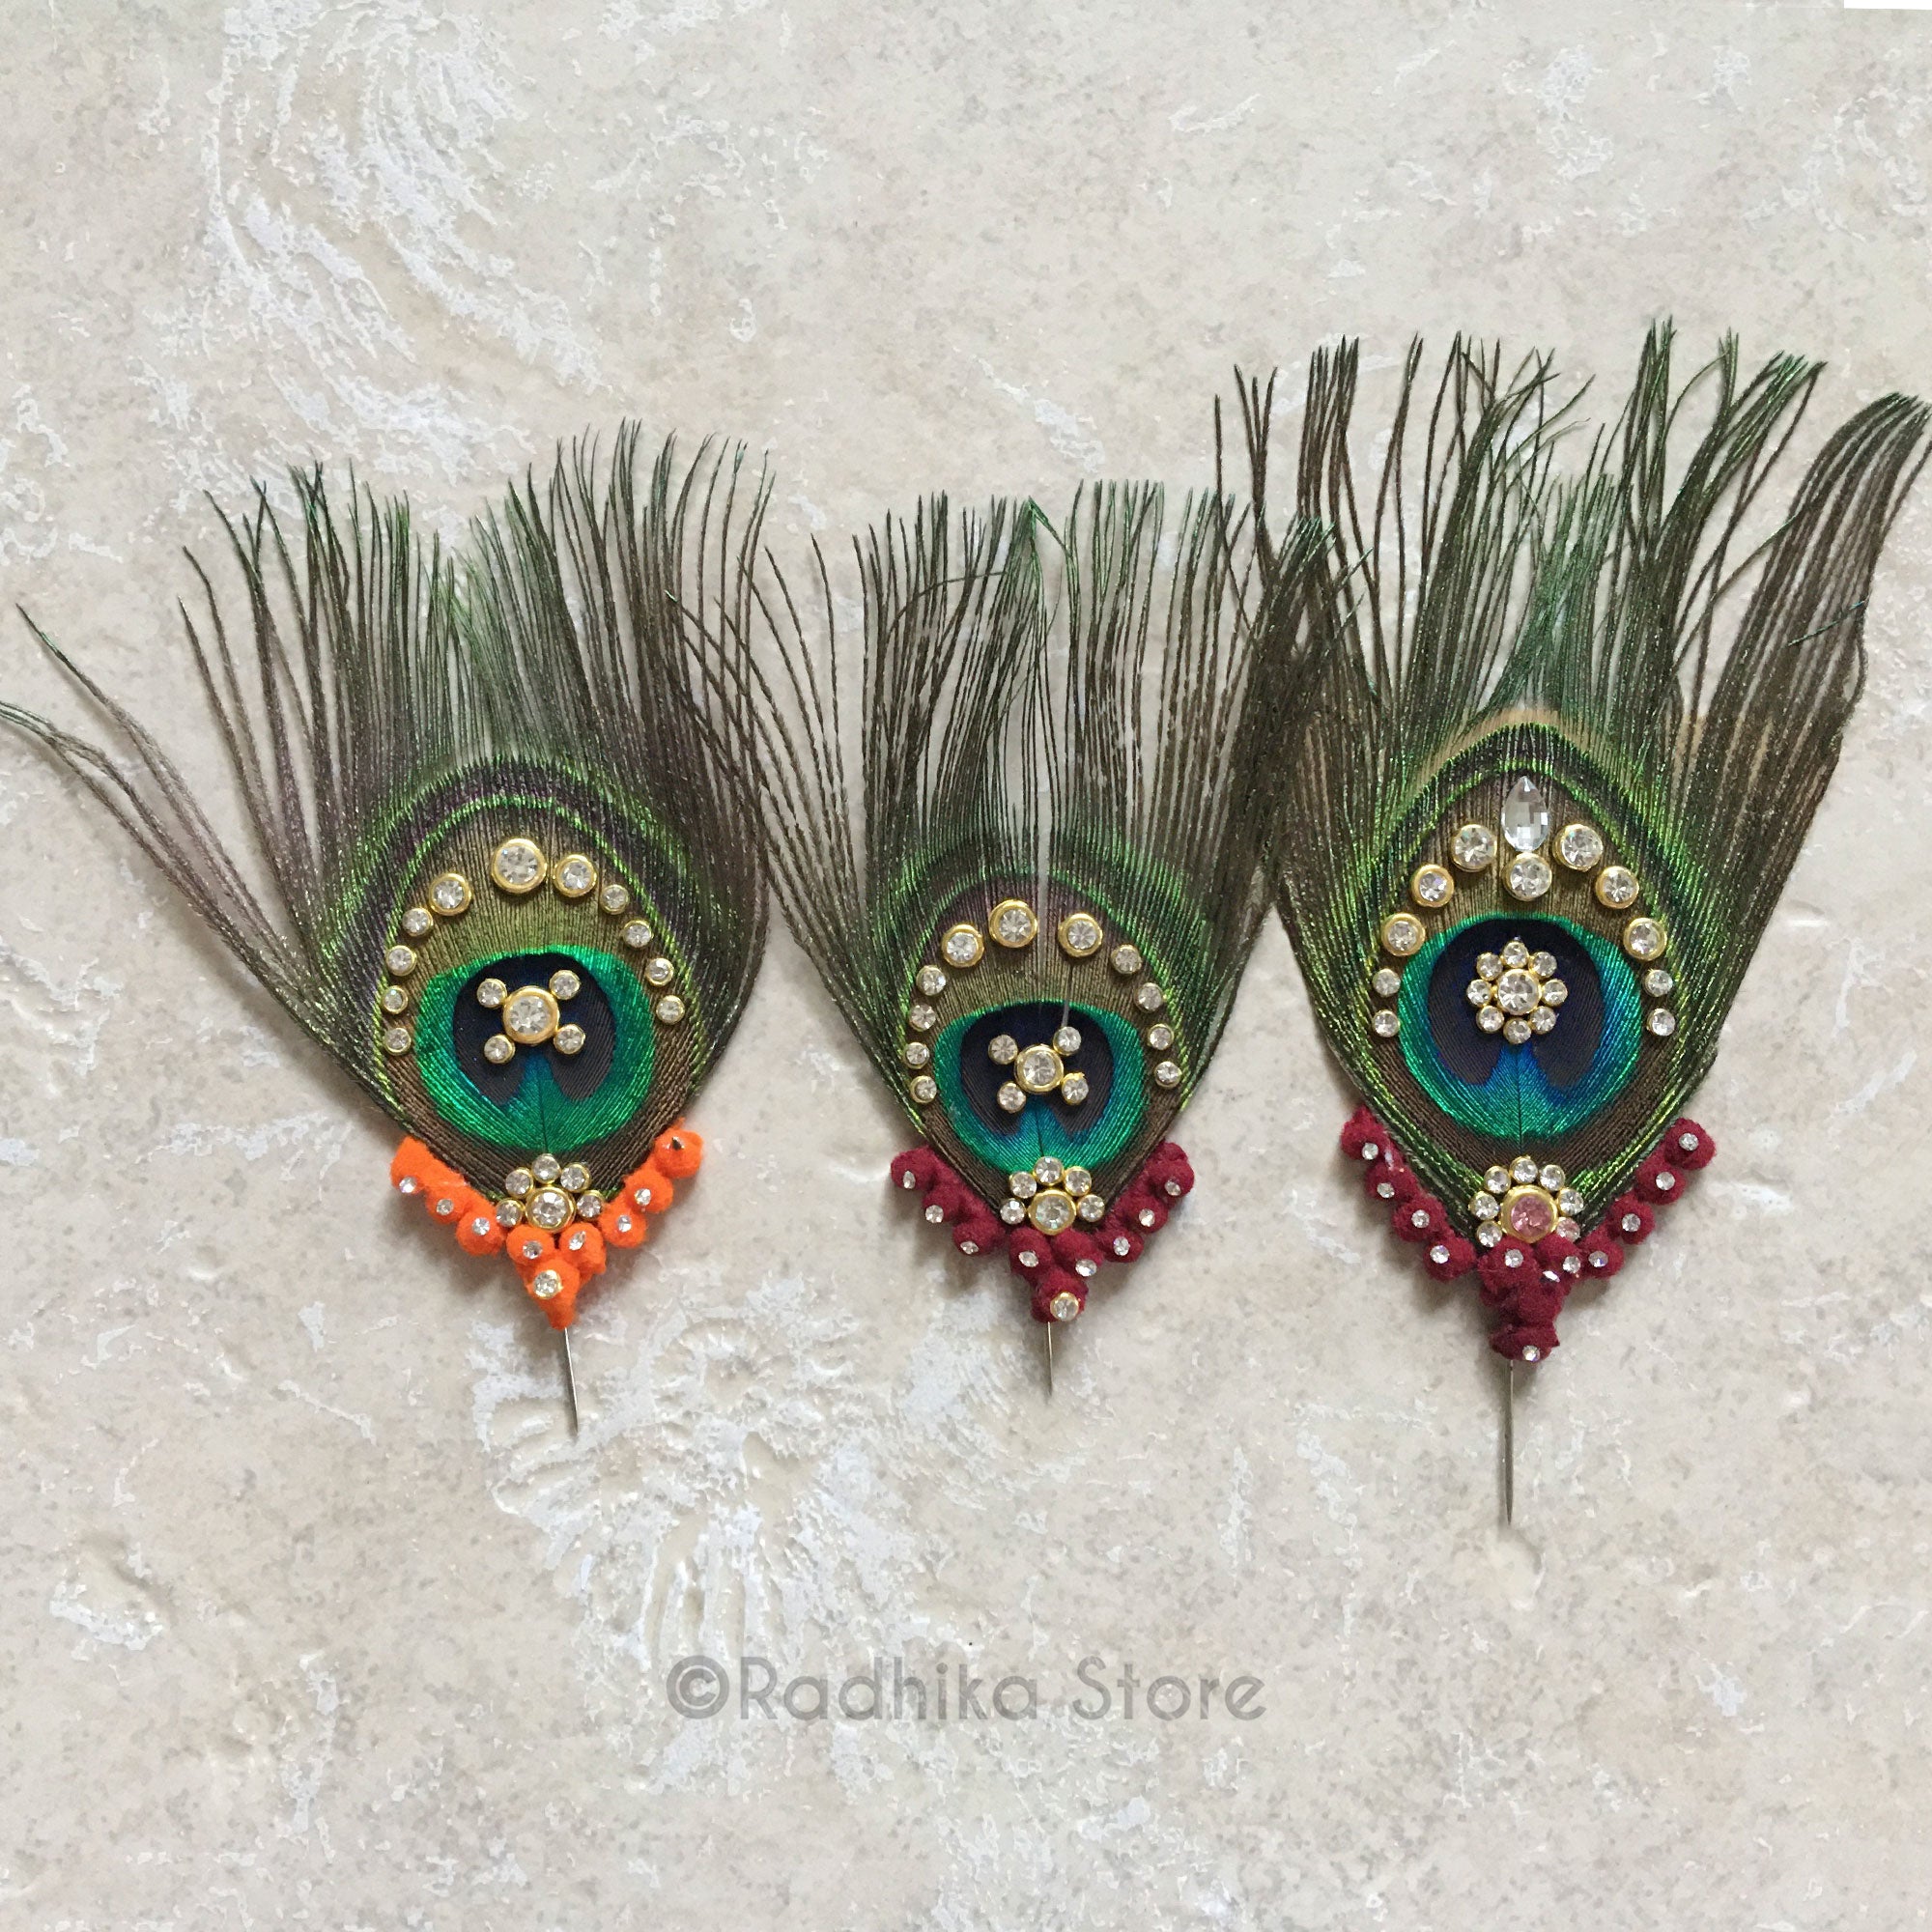 Extra Large Crystal Peacock Feathers - Maroon Color